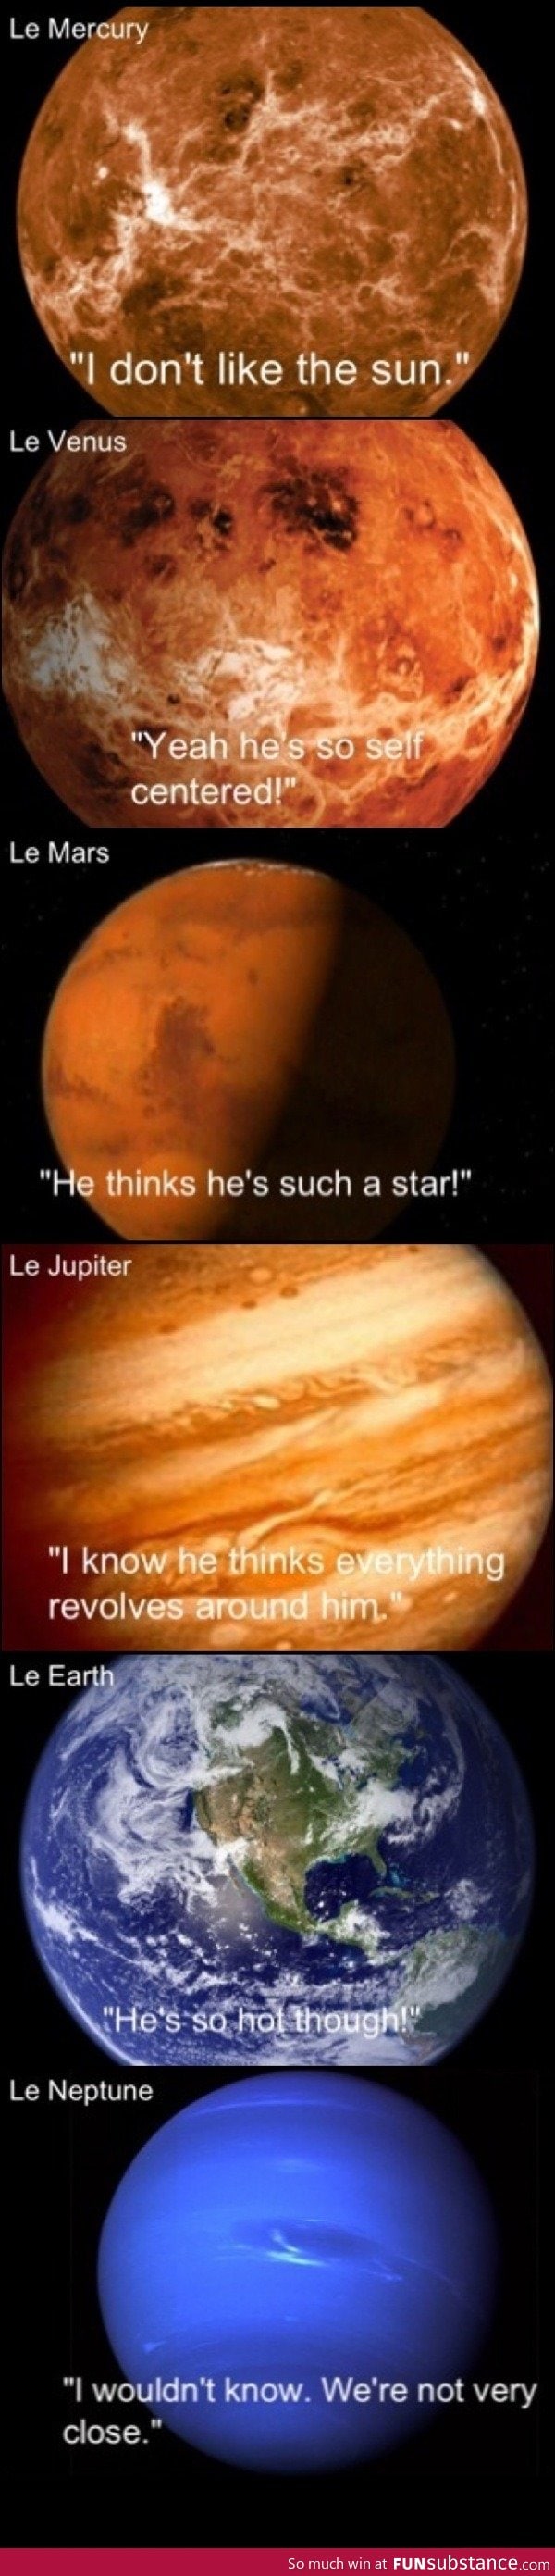 If planets could talk